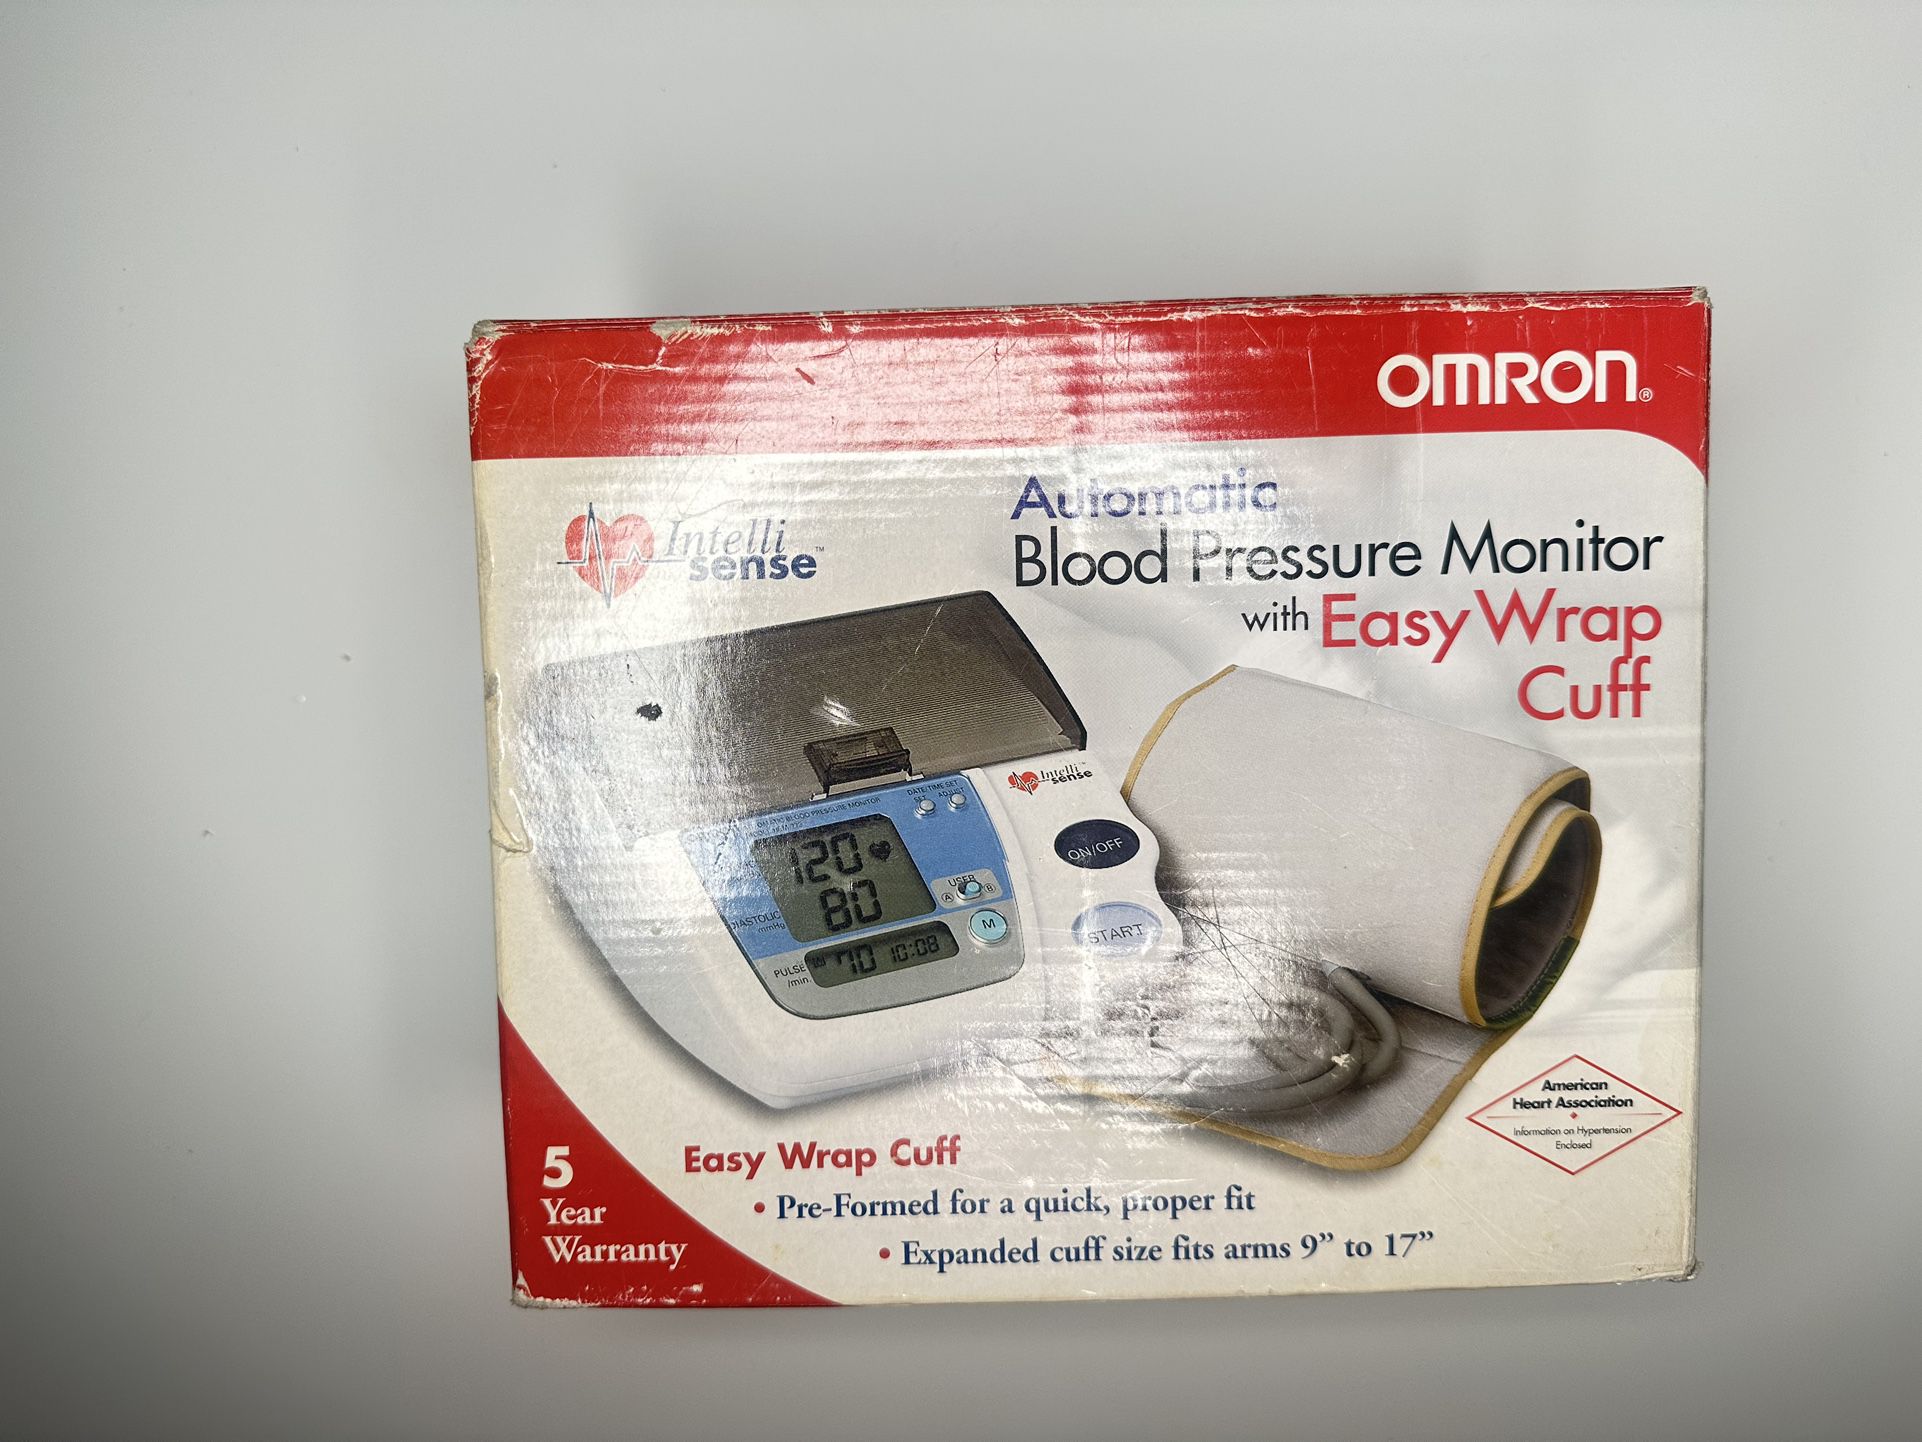 Konquest blood pressure monitor for Sale in Conover, NC - OfferUp